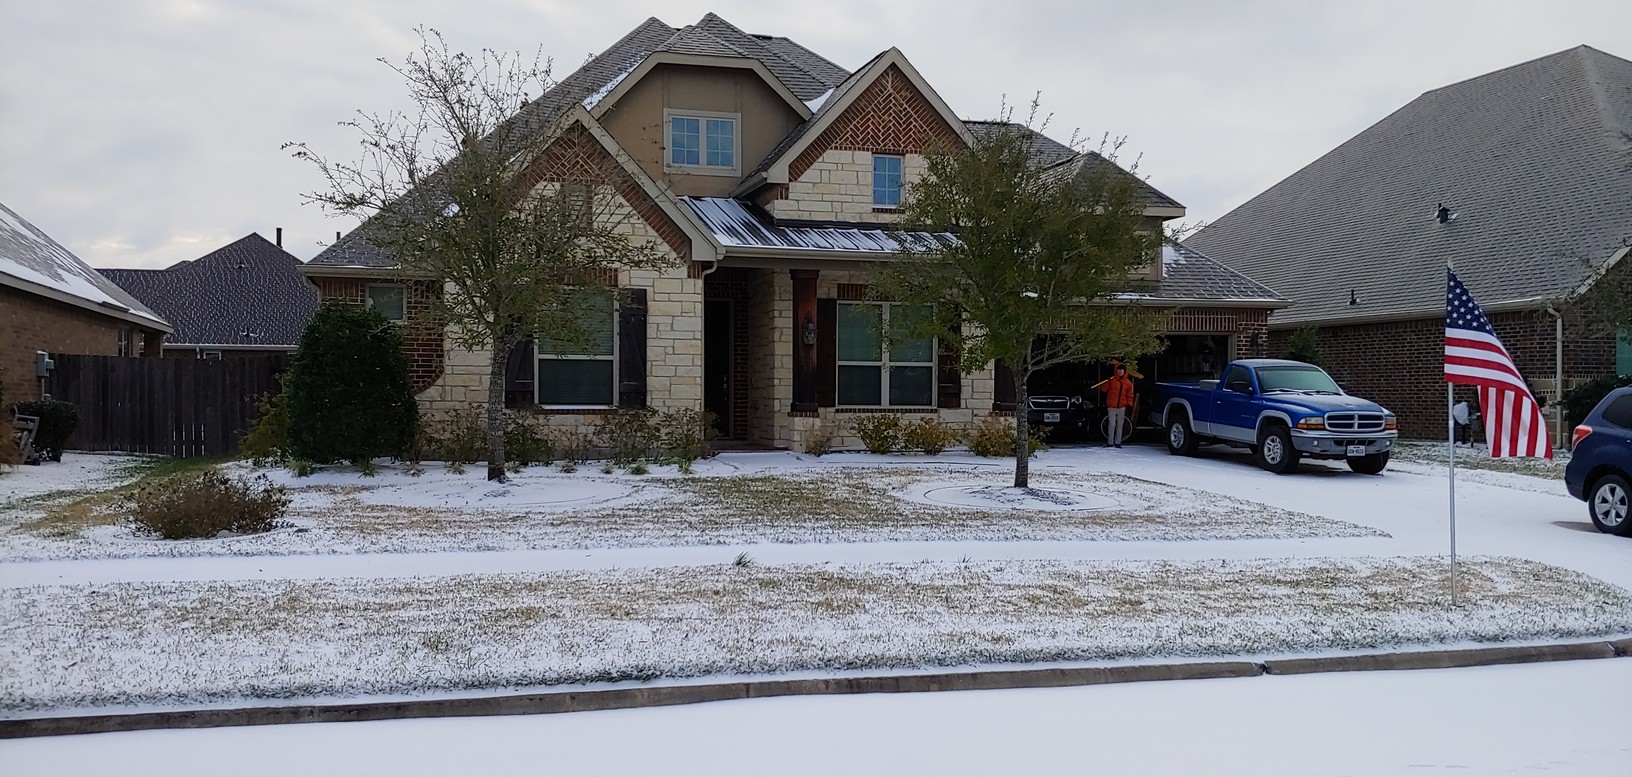 Our house with snow on the ground and Wilson in the garage